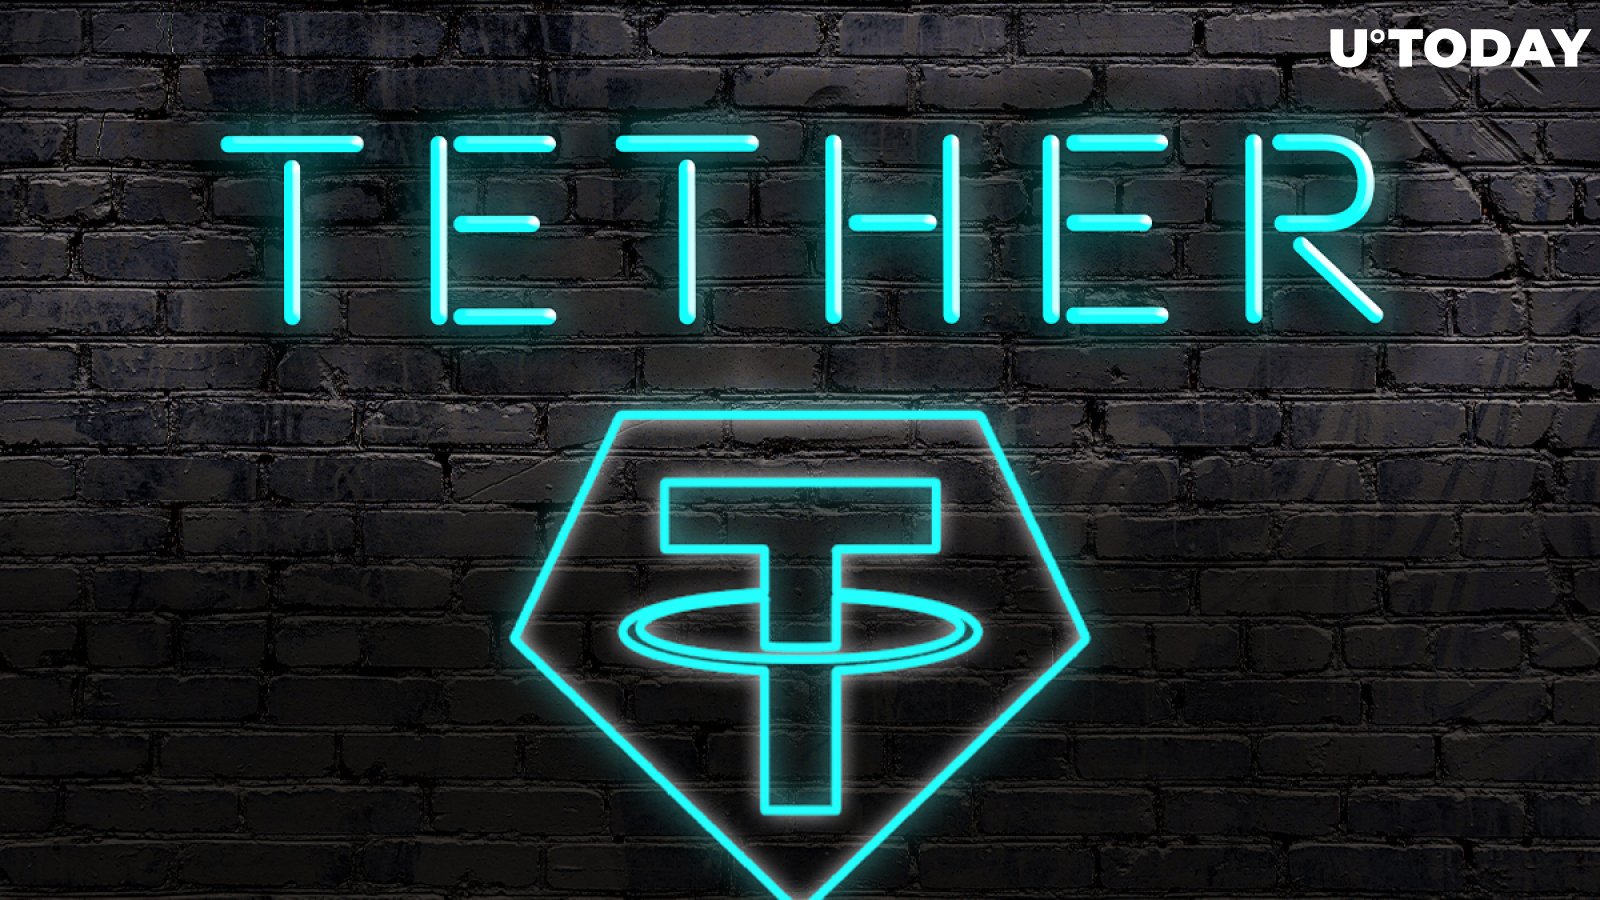 Bloomberg Commodity Strategist on Tether: "Who Knows What It’s Backed By"